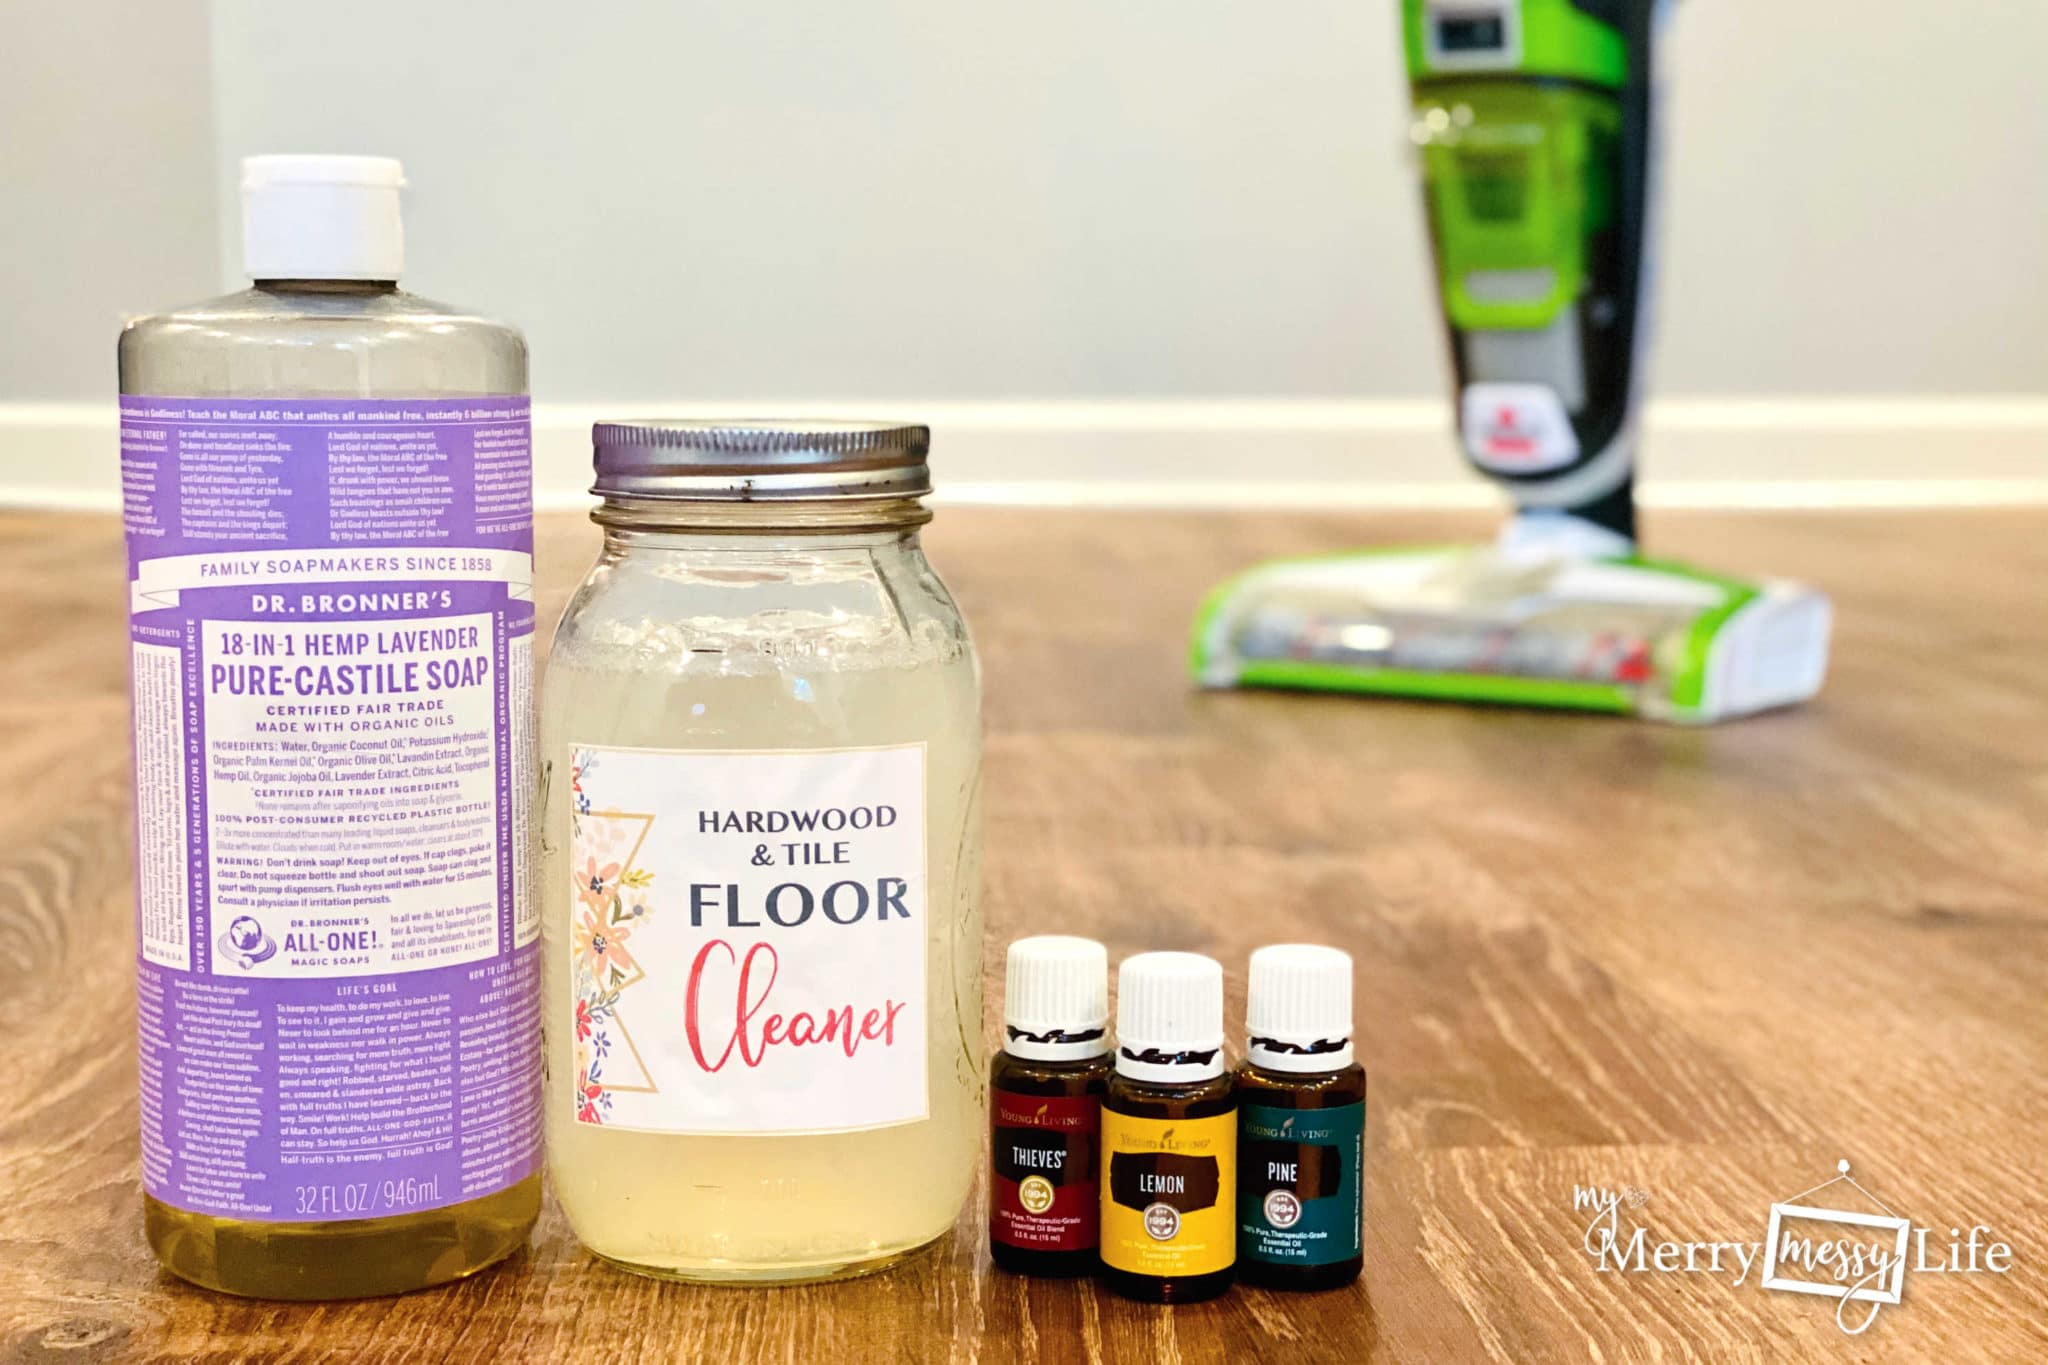 DIY Natural Hardwood and Tile Floor Cleaner using water, Castile Soap and essential oils plus two other recipes!